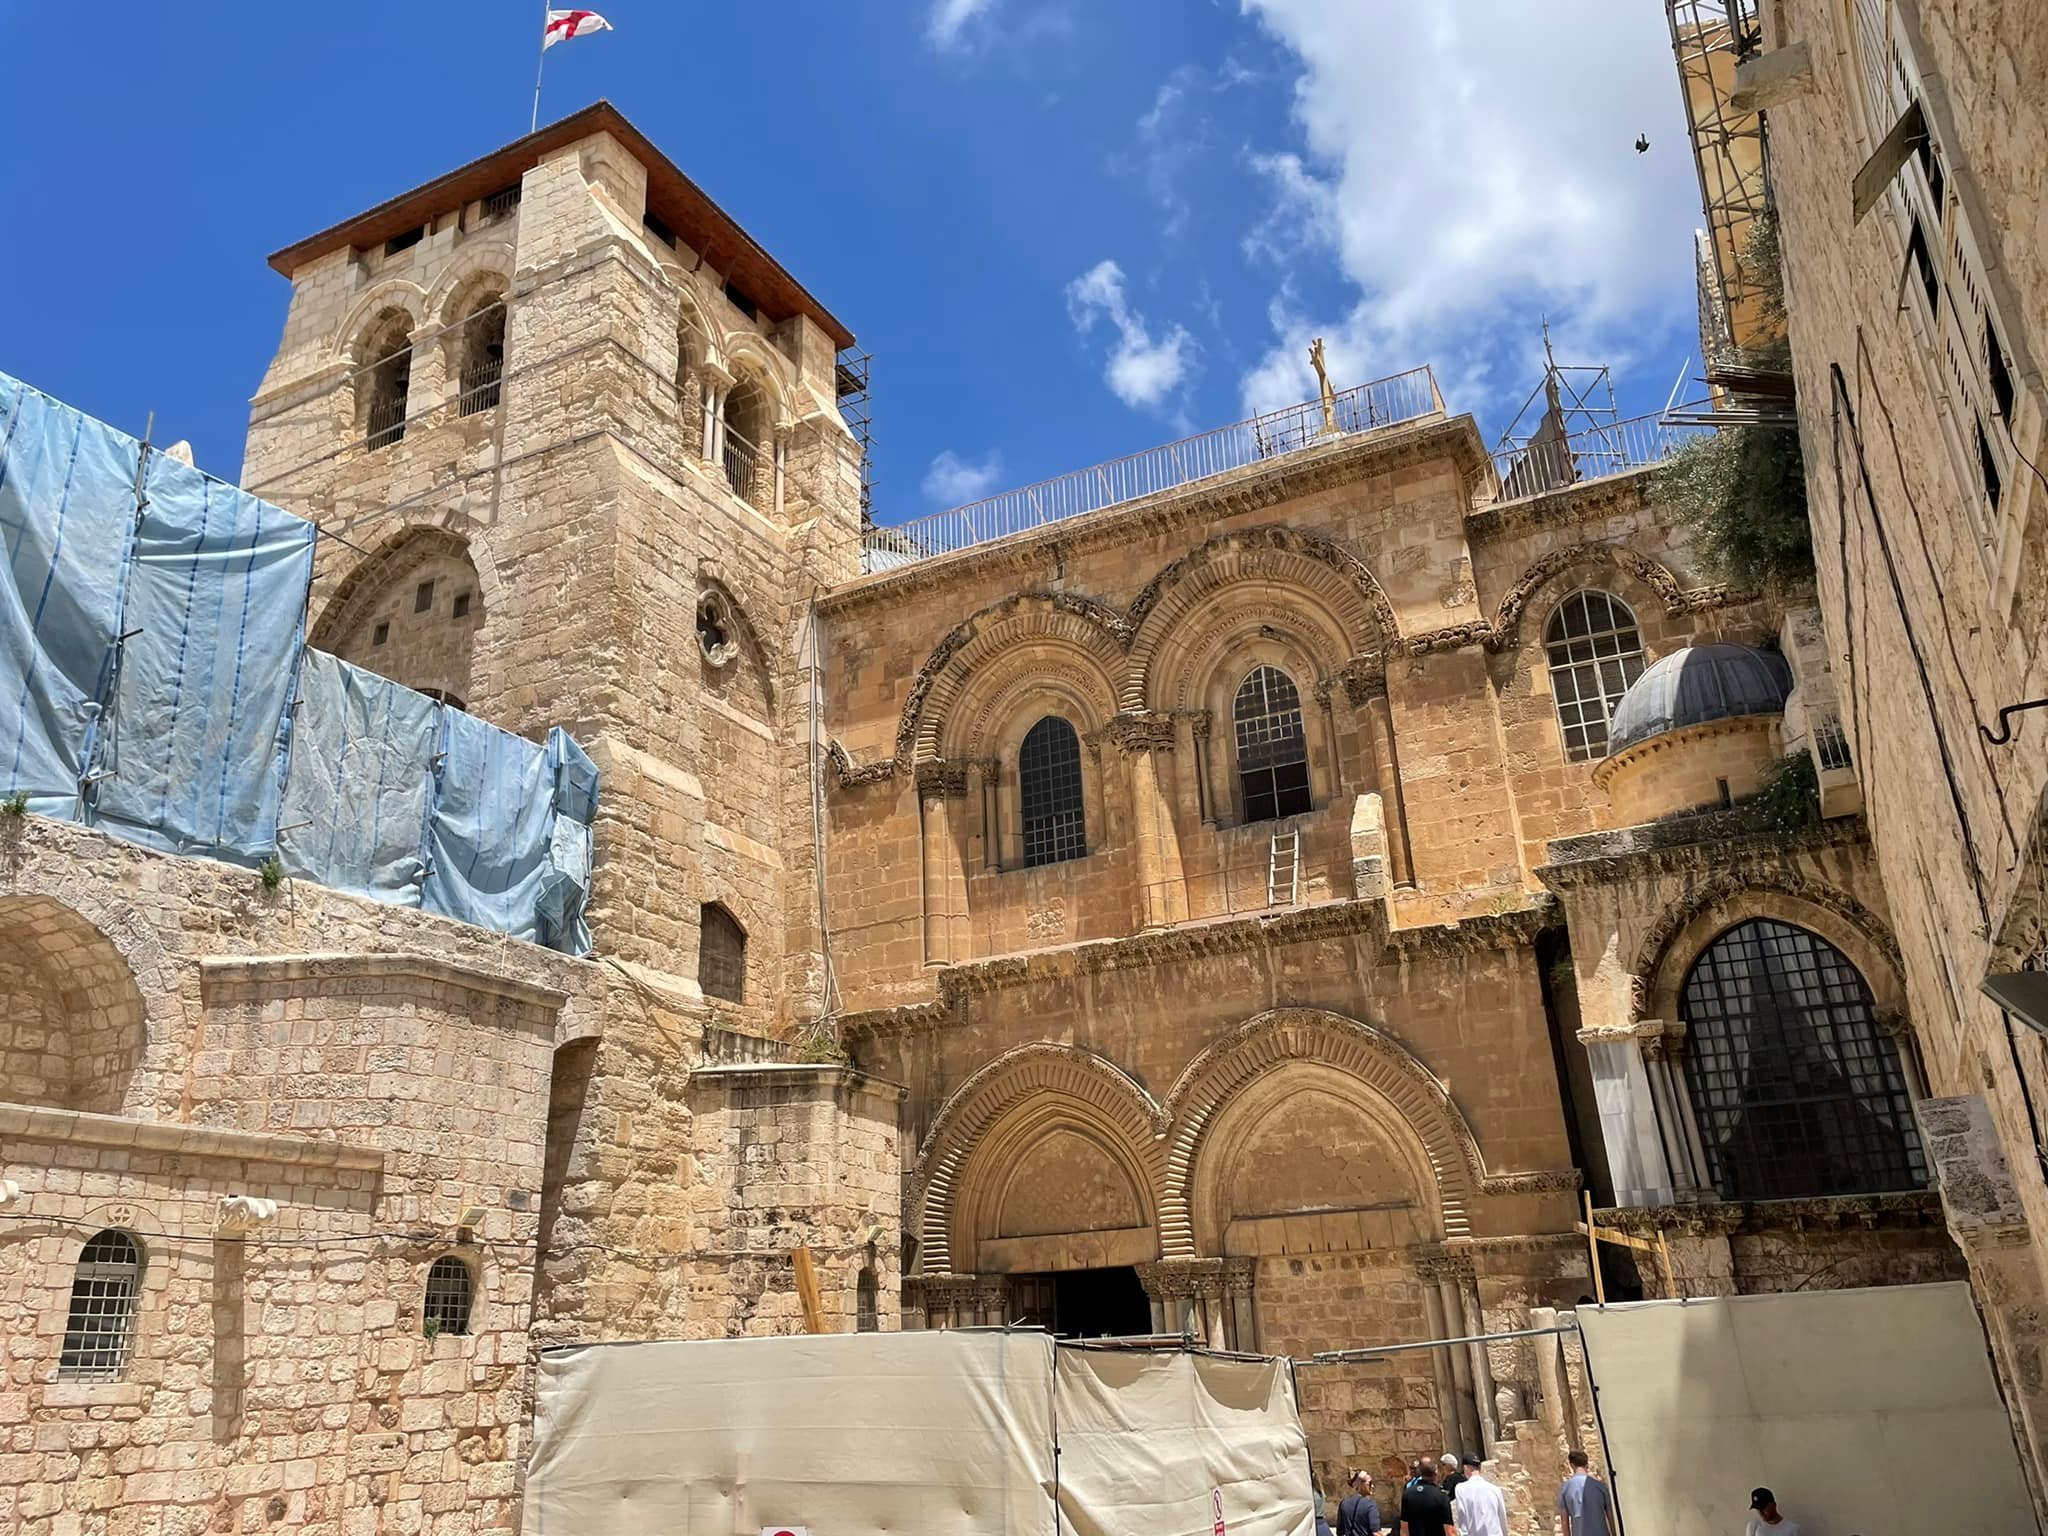  The church of the holy sepulcher is an international church. The three churches who share it cannot agree on who should open the door. So they hire a Muslim family to do it every day. 